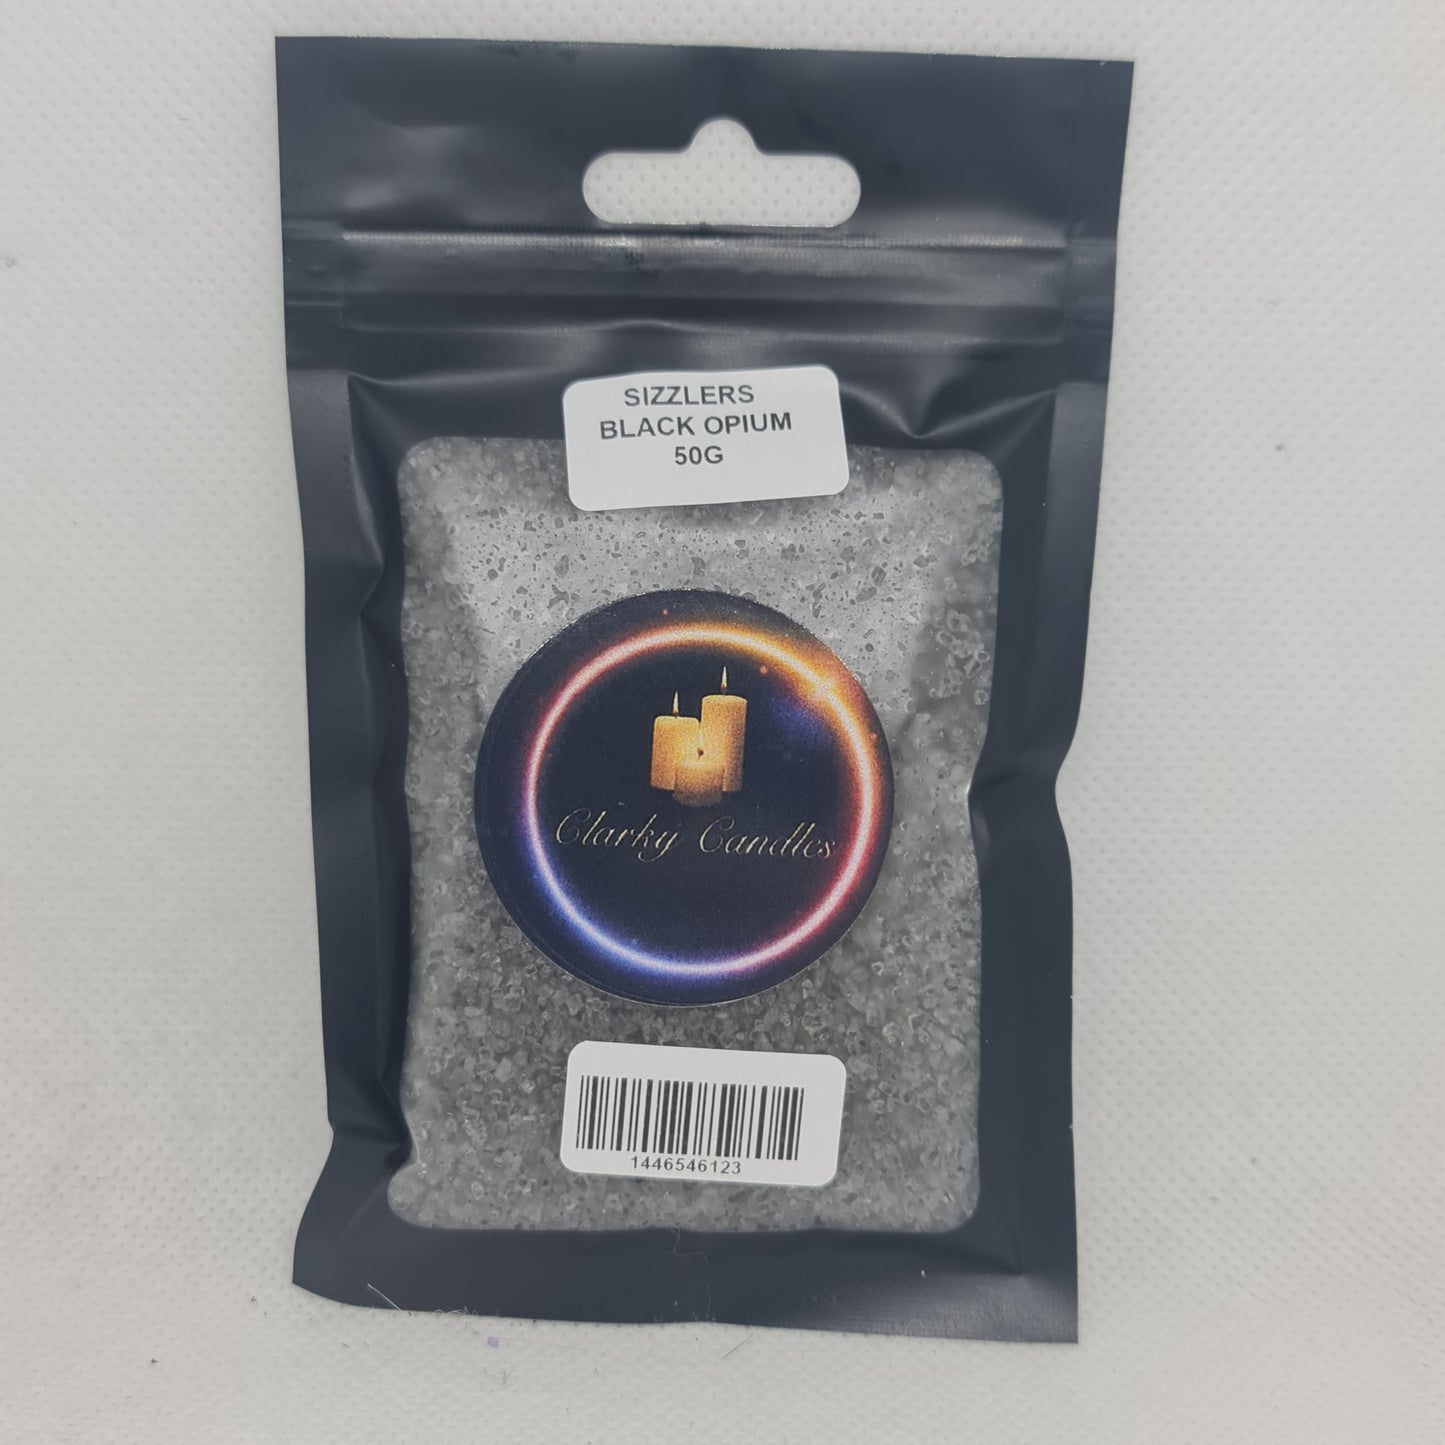 Black Opium - 150g - Scented Sizzlers